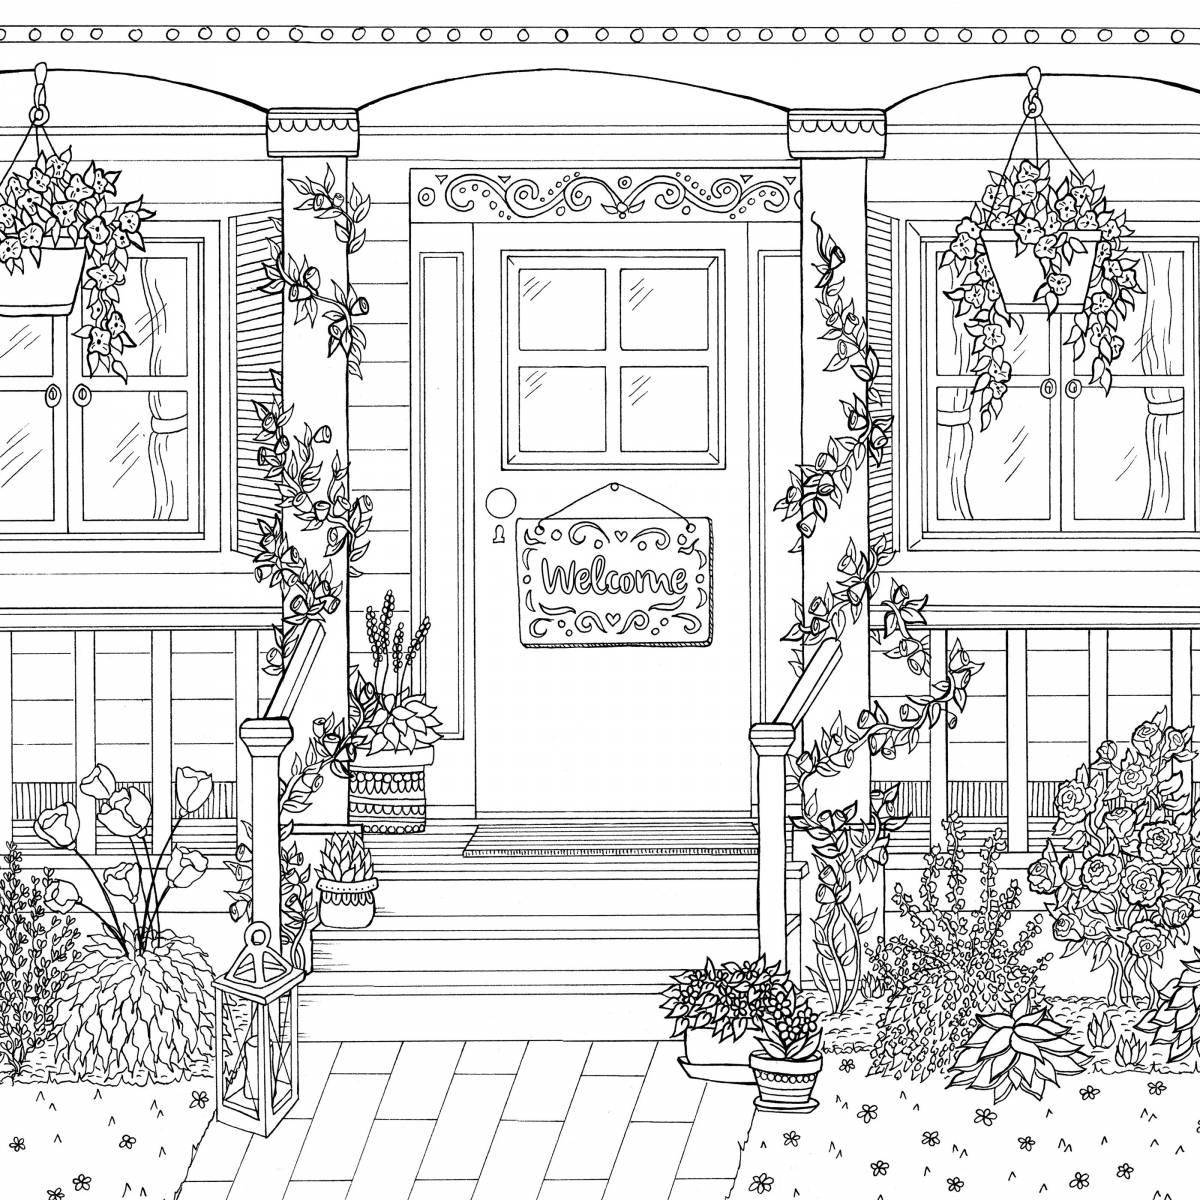 Glamorous coloring page decor